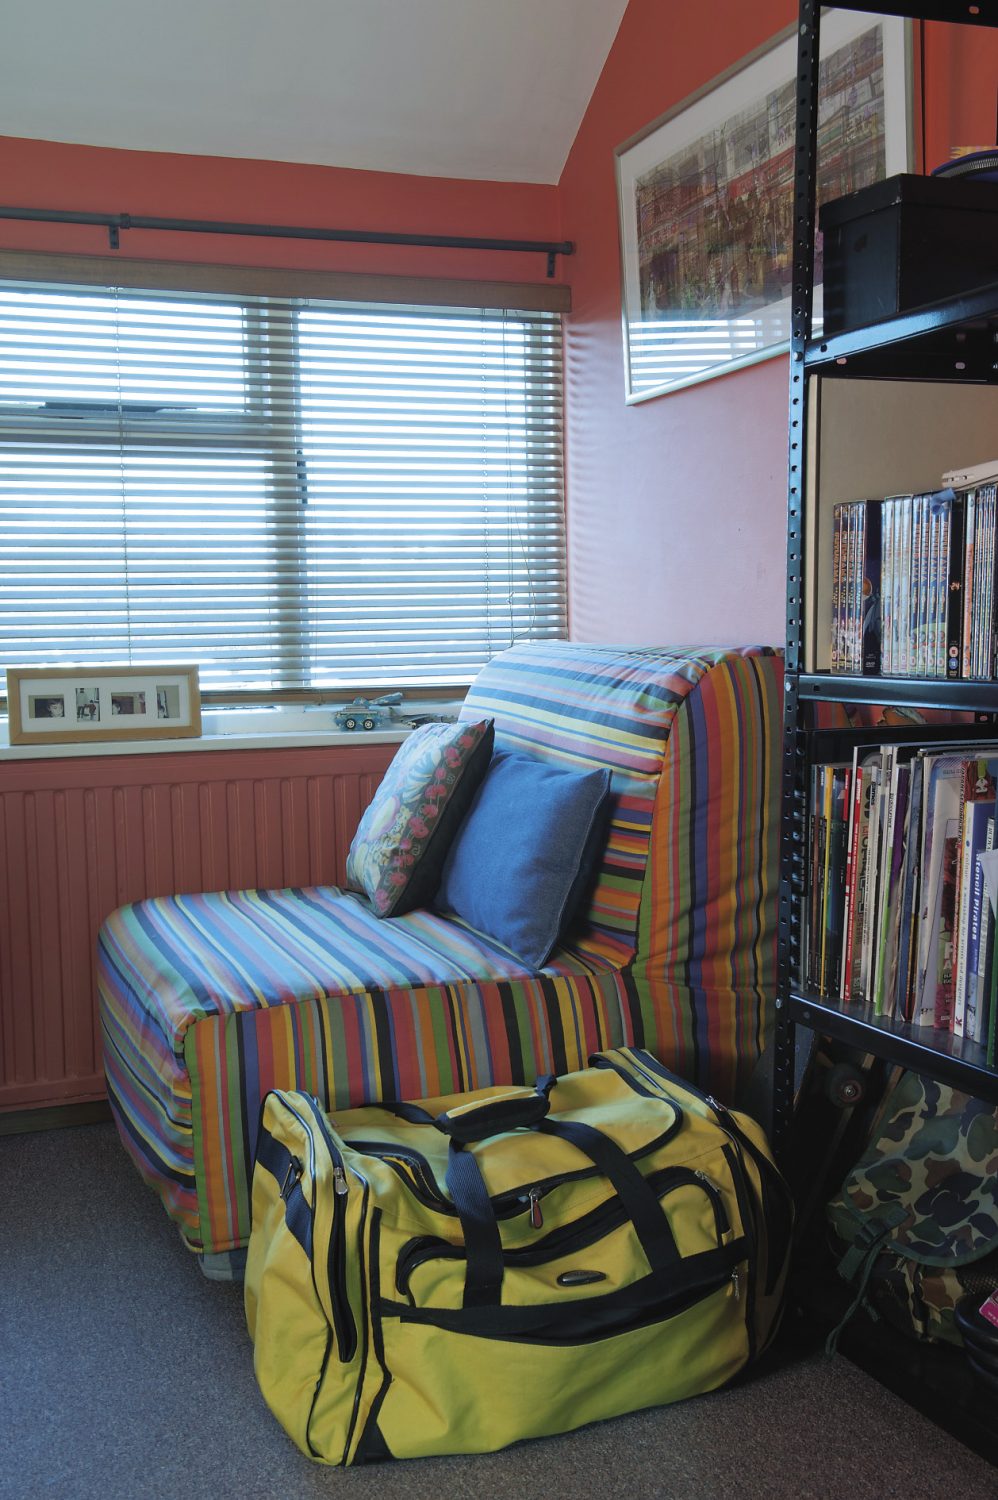 The couple’s son’s room already shows all the telltale signs of the architectural student. Every item of furniture is placed at right angles to the watermelon red walls (architects never seem to place anything on the diagonal) and there is a striped chair in front of the window where curtains have been rejected in favour of simple wooden Venetian blinds